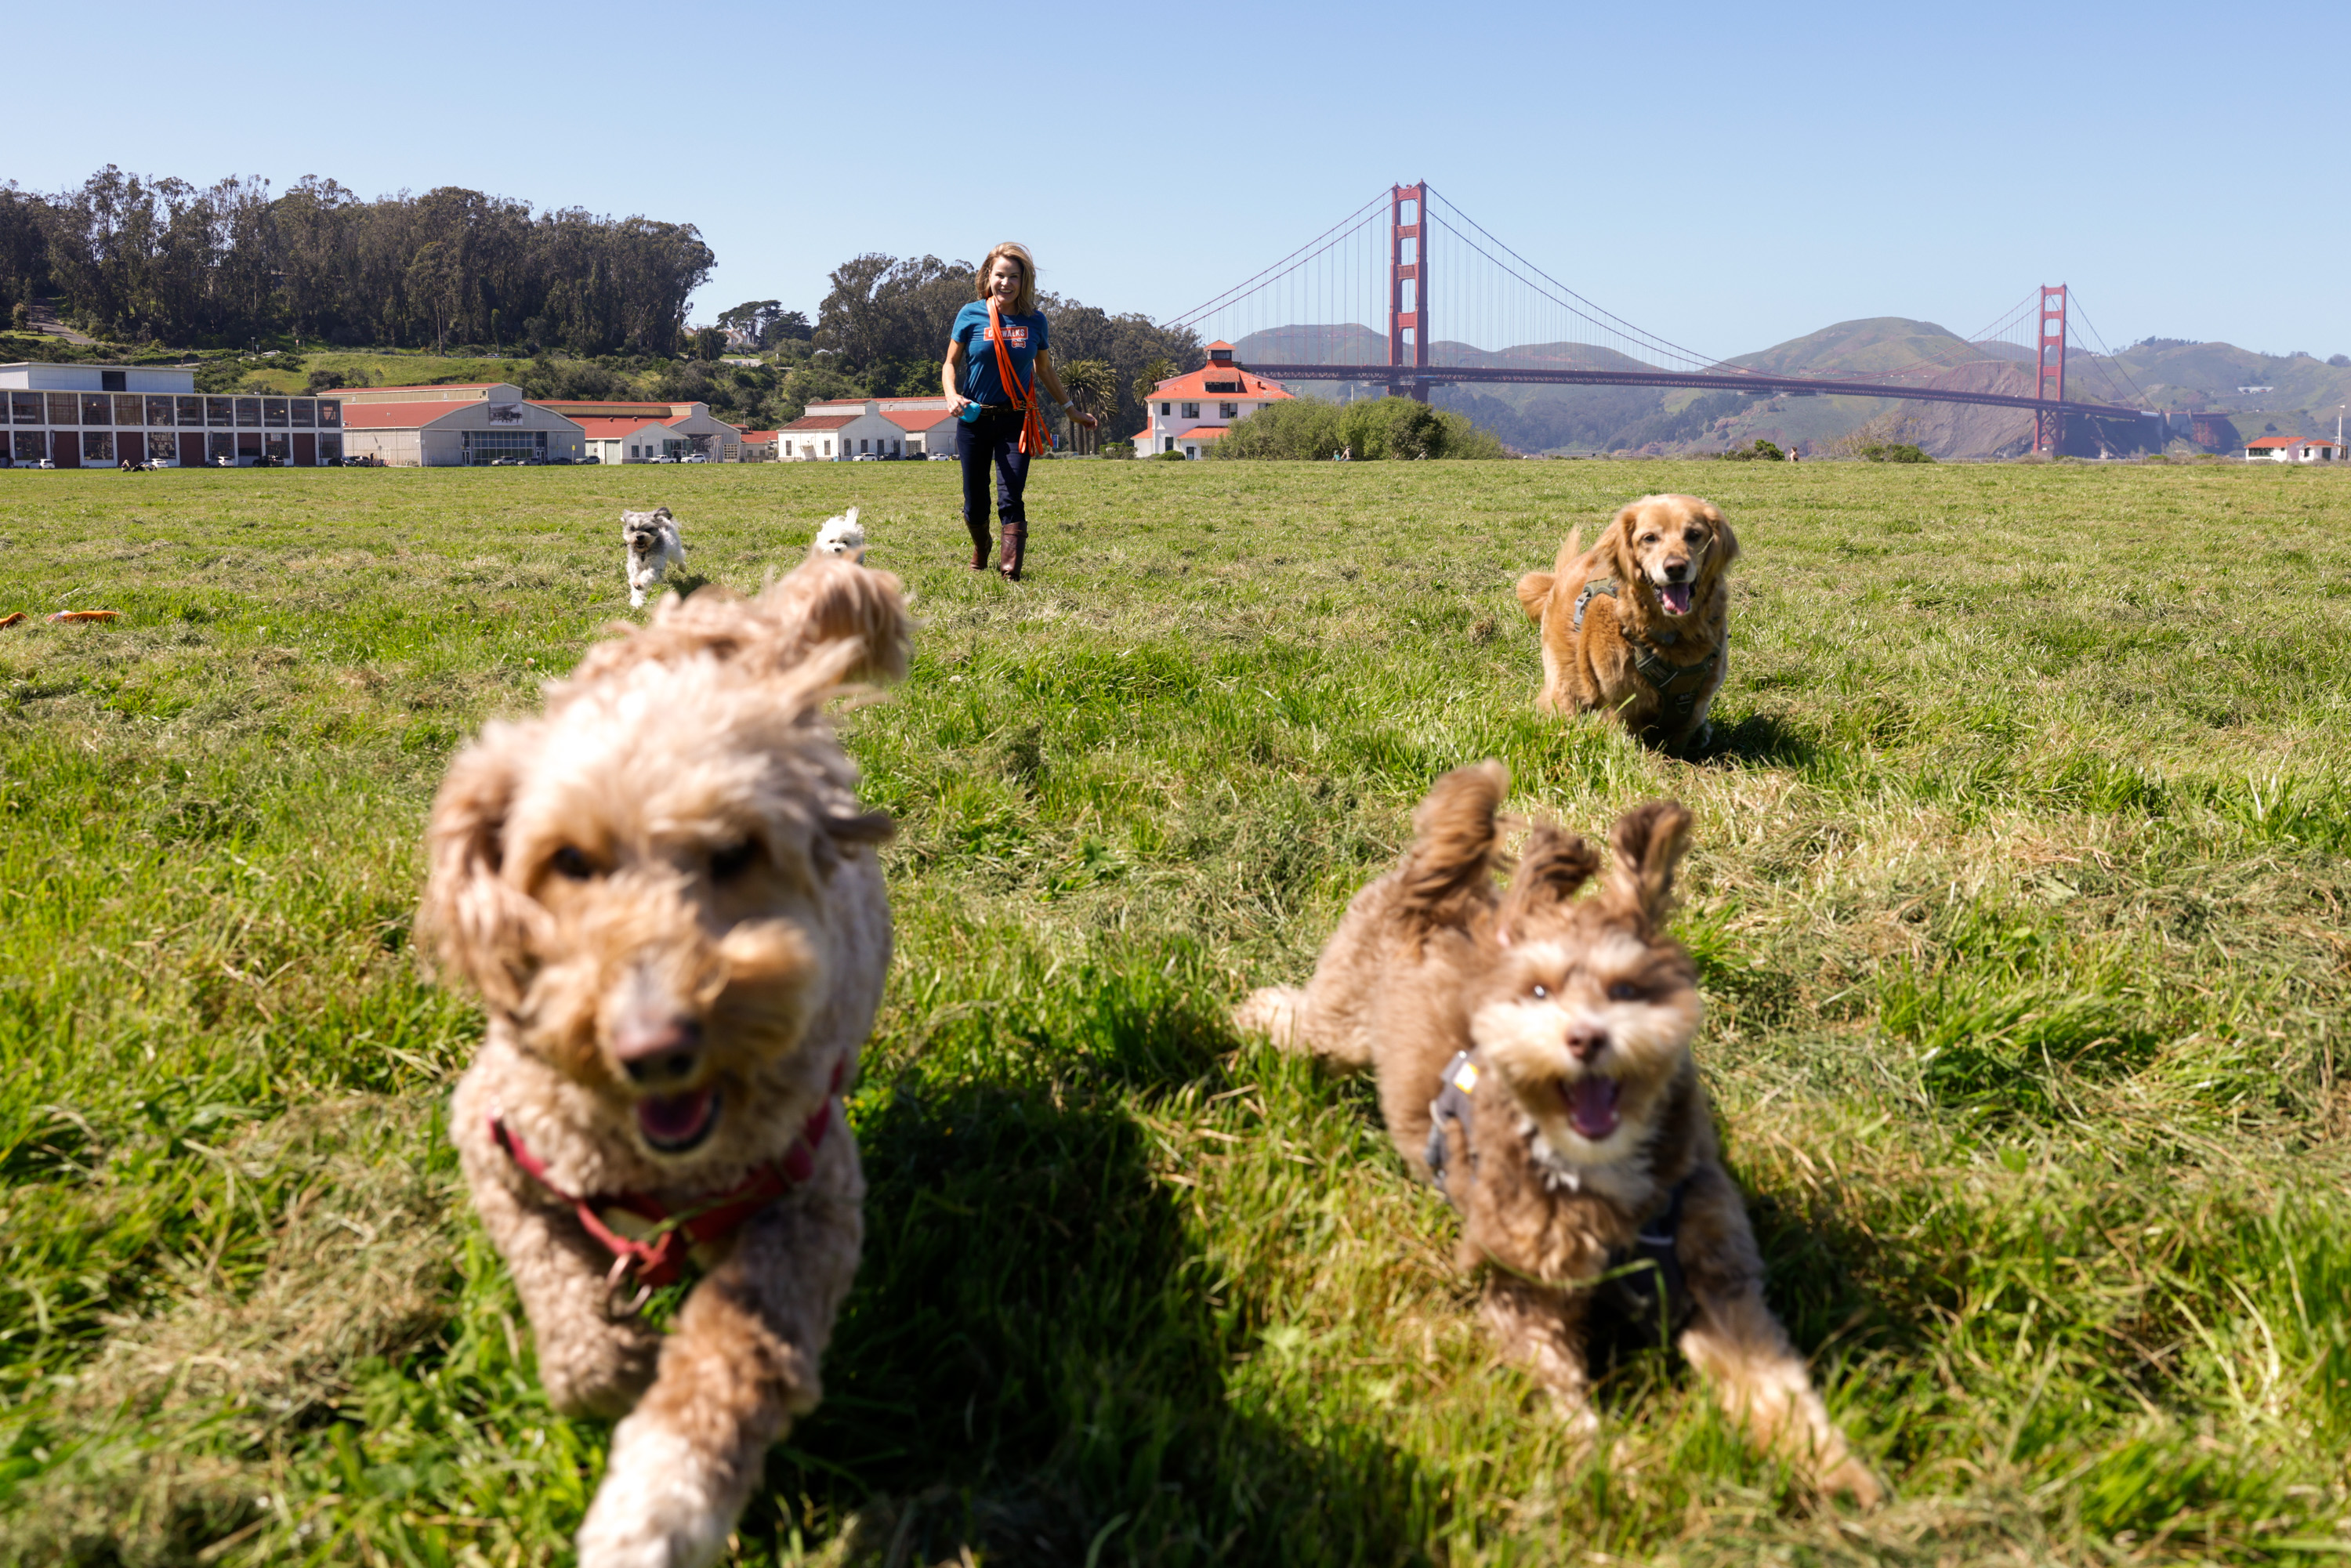 A woman walks dogs in a field with the Golden Gate Bridge in the background.